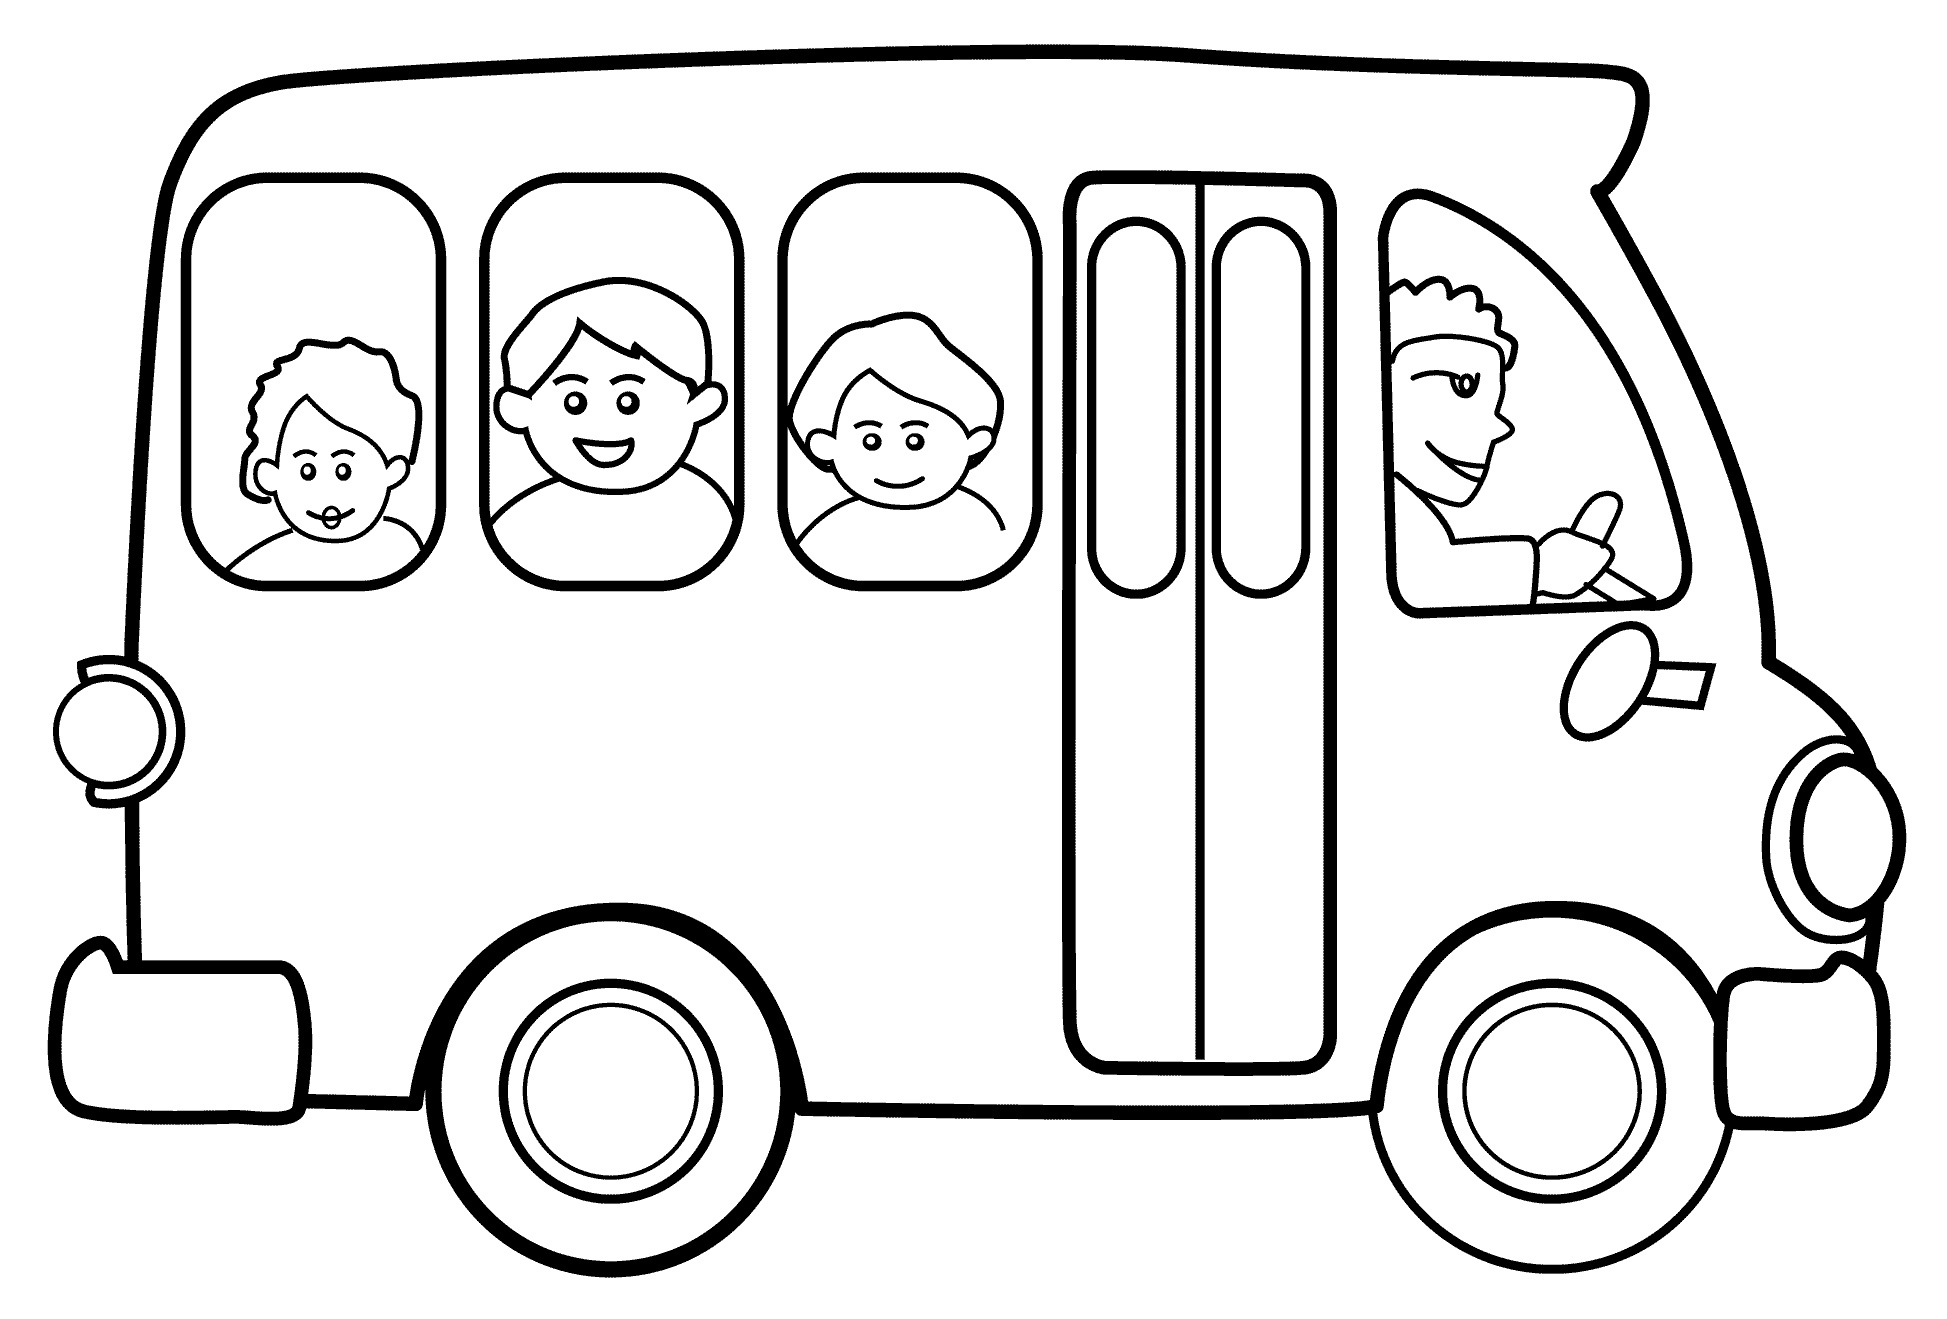 Bus for children 4 5 years old #21